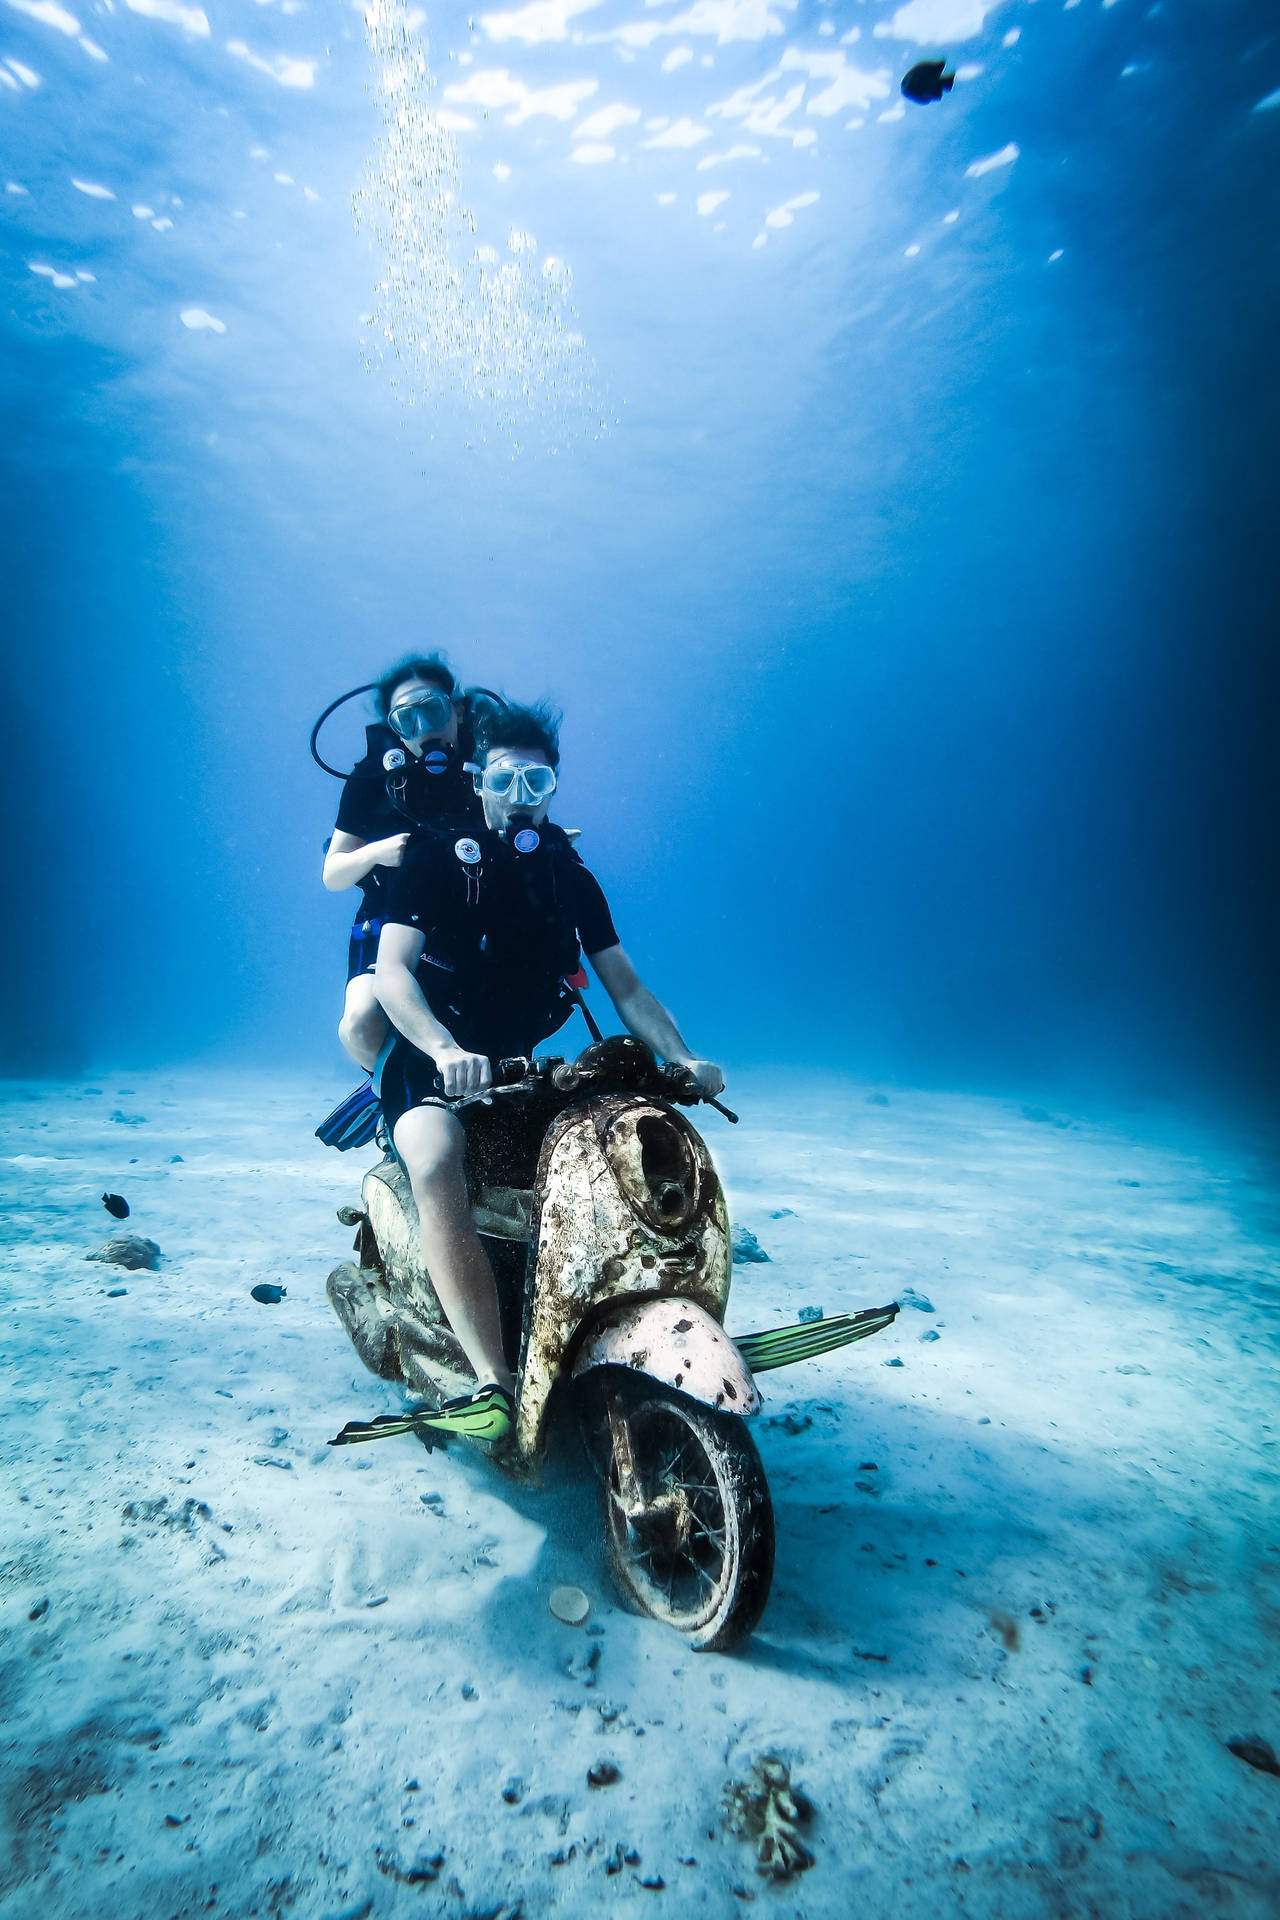 Scuba Diving And Riding Motorcycle Underwater Background